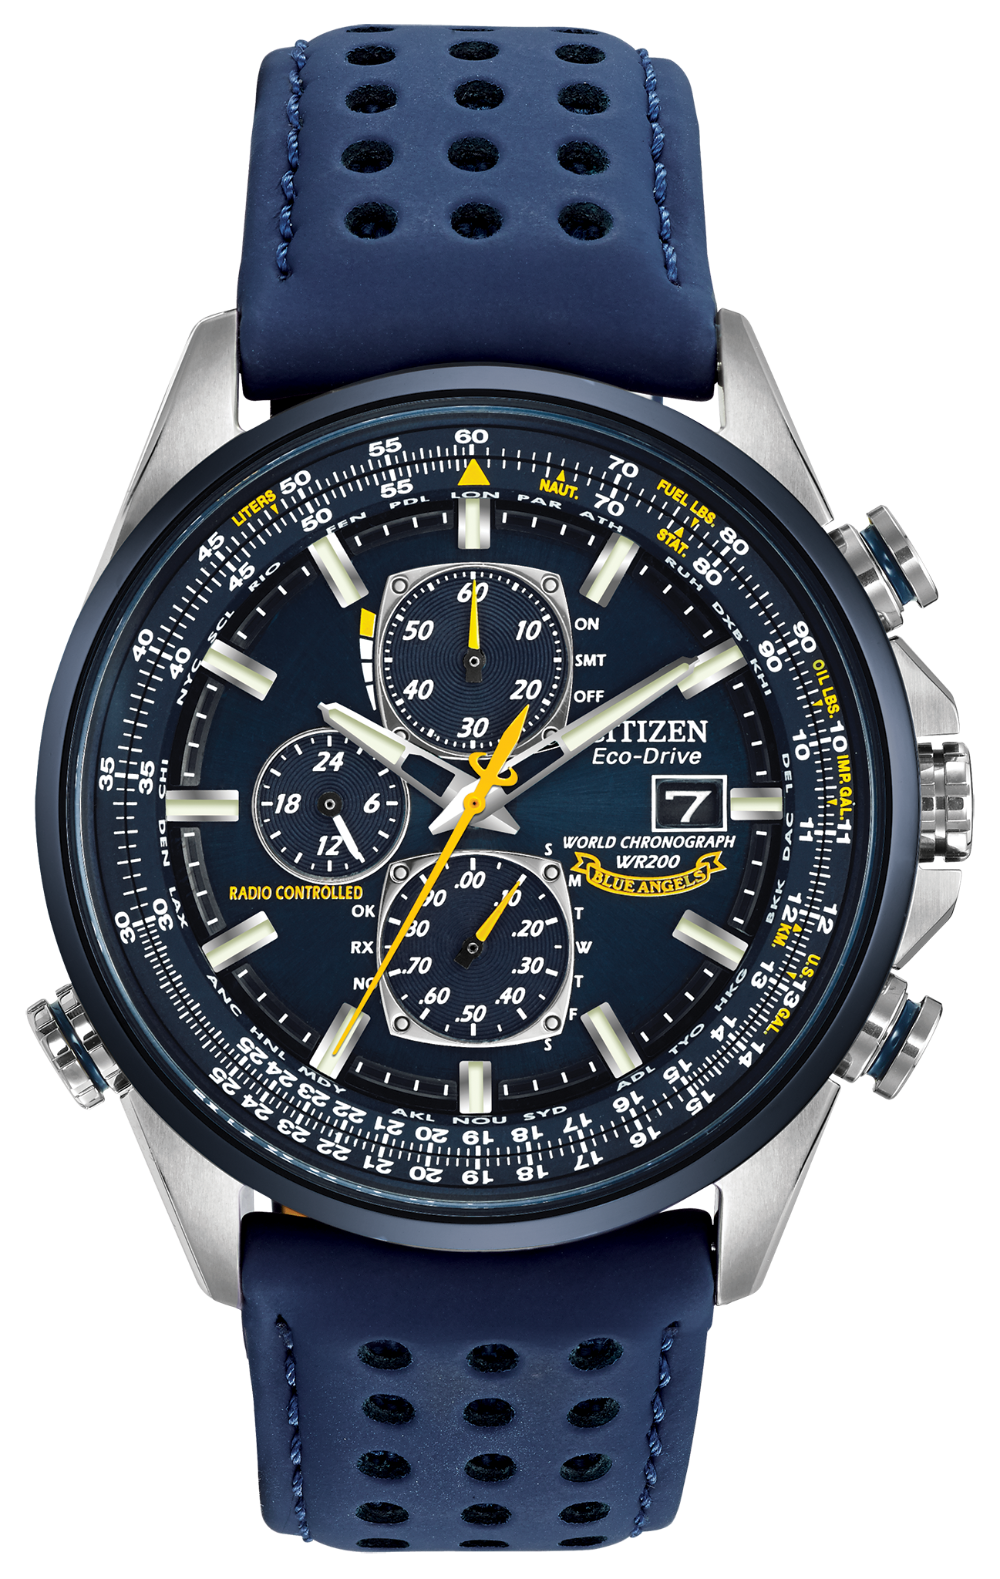 World Chronograph A-T.png